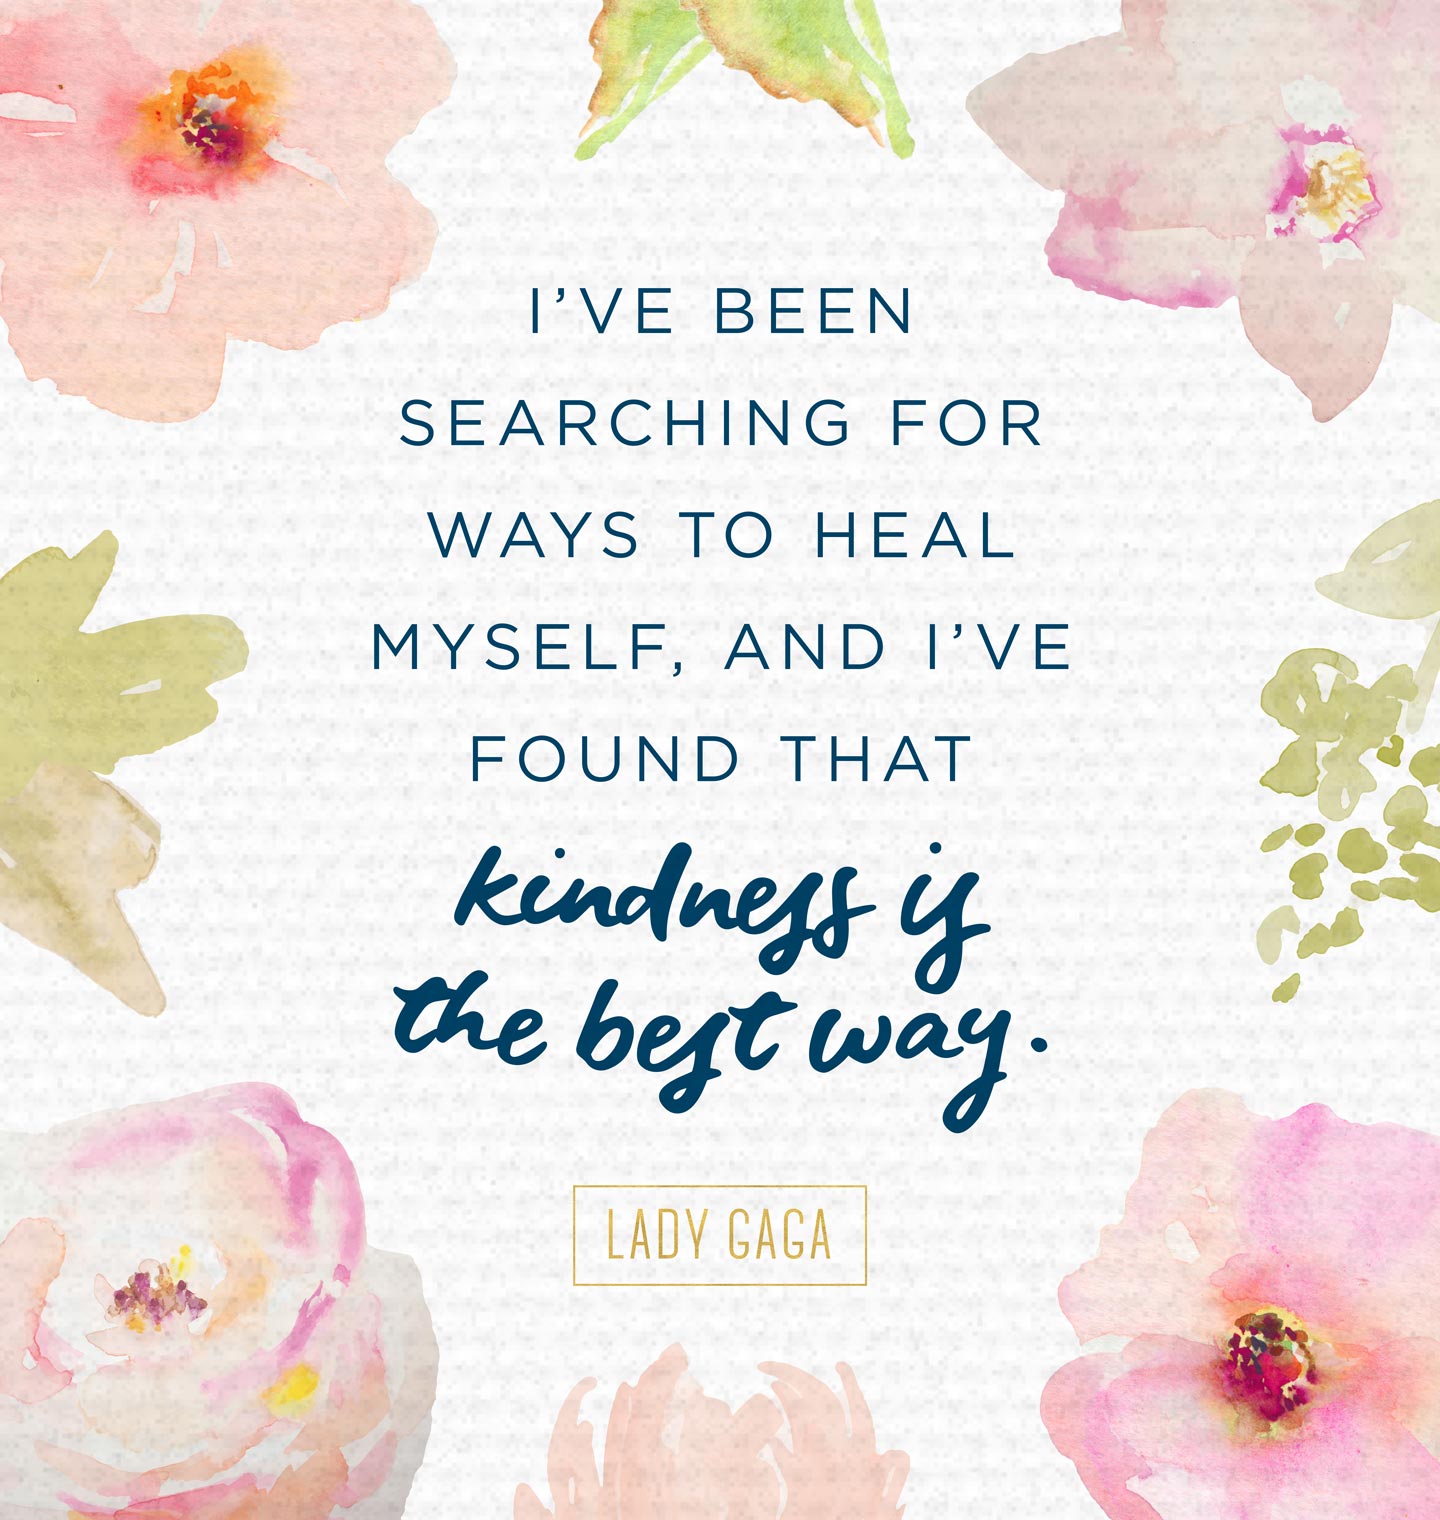 i’ve been searching for ways to heal myself and i’ve found that kindness is the best way.